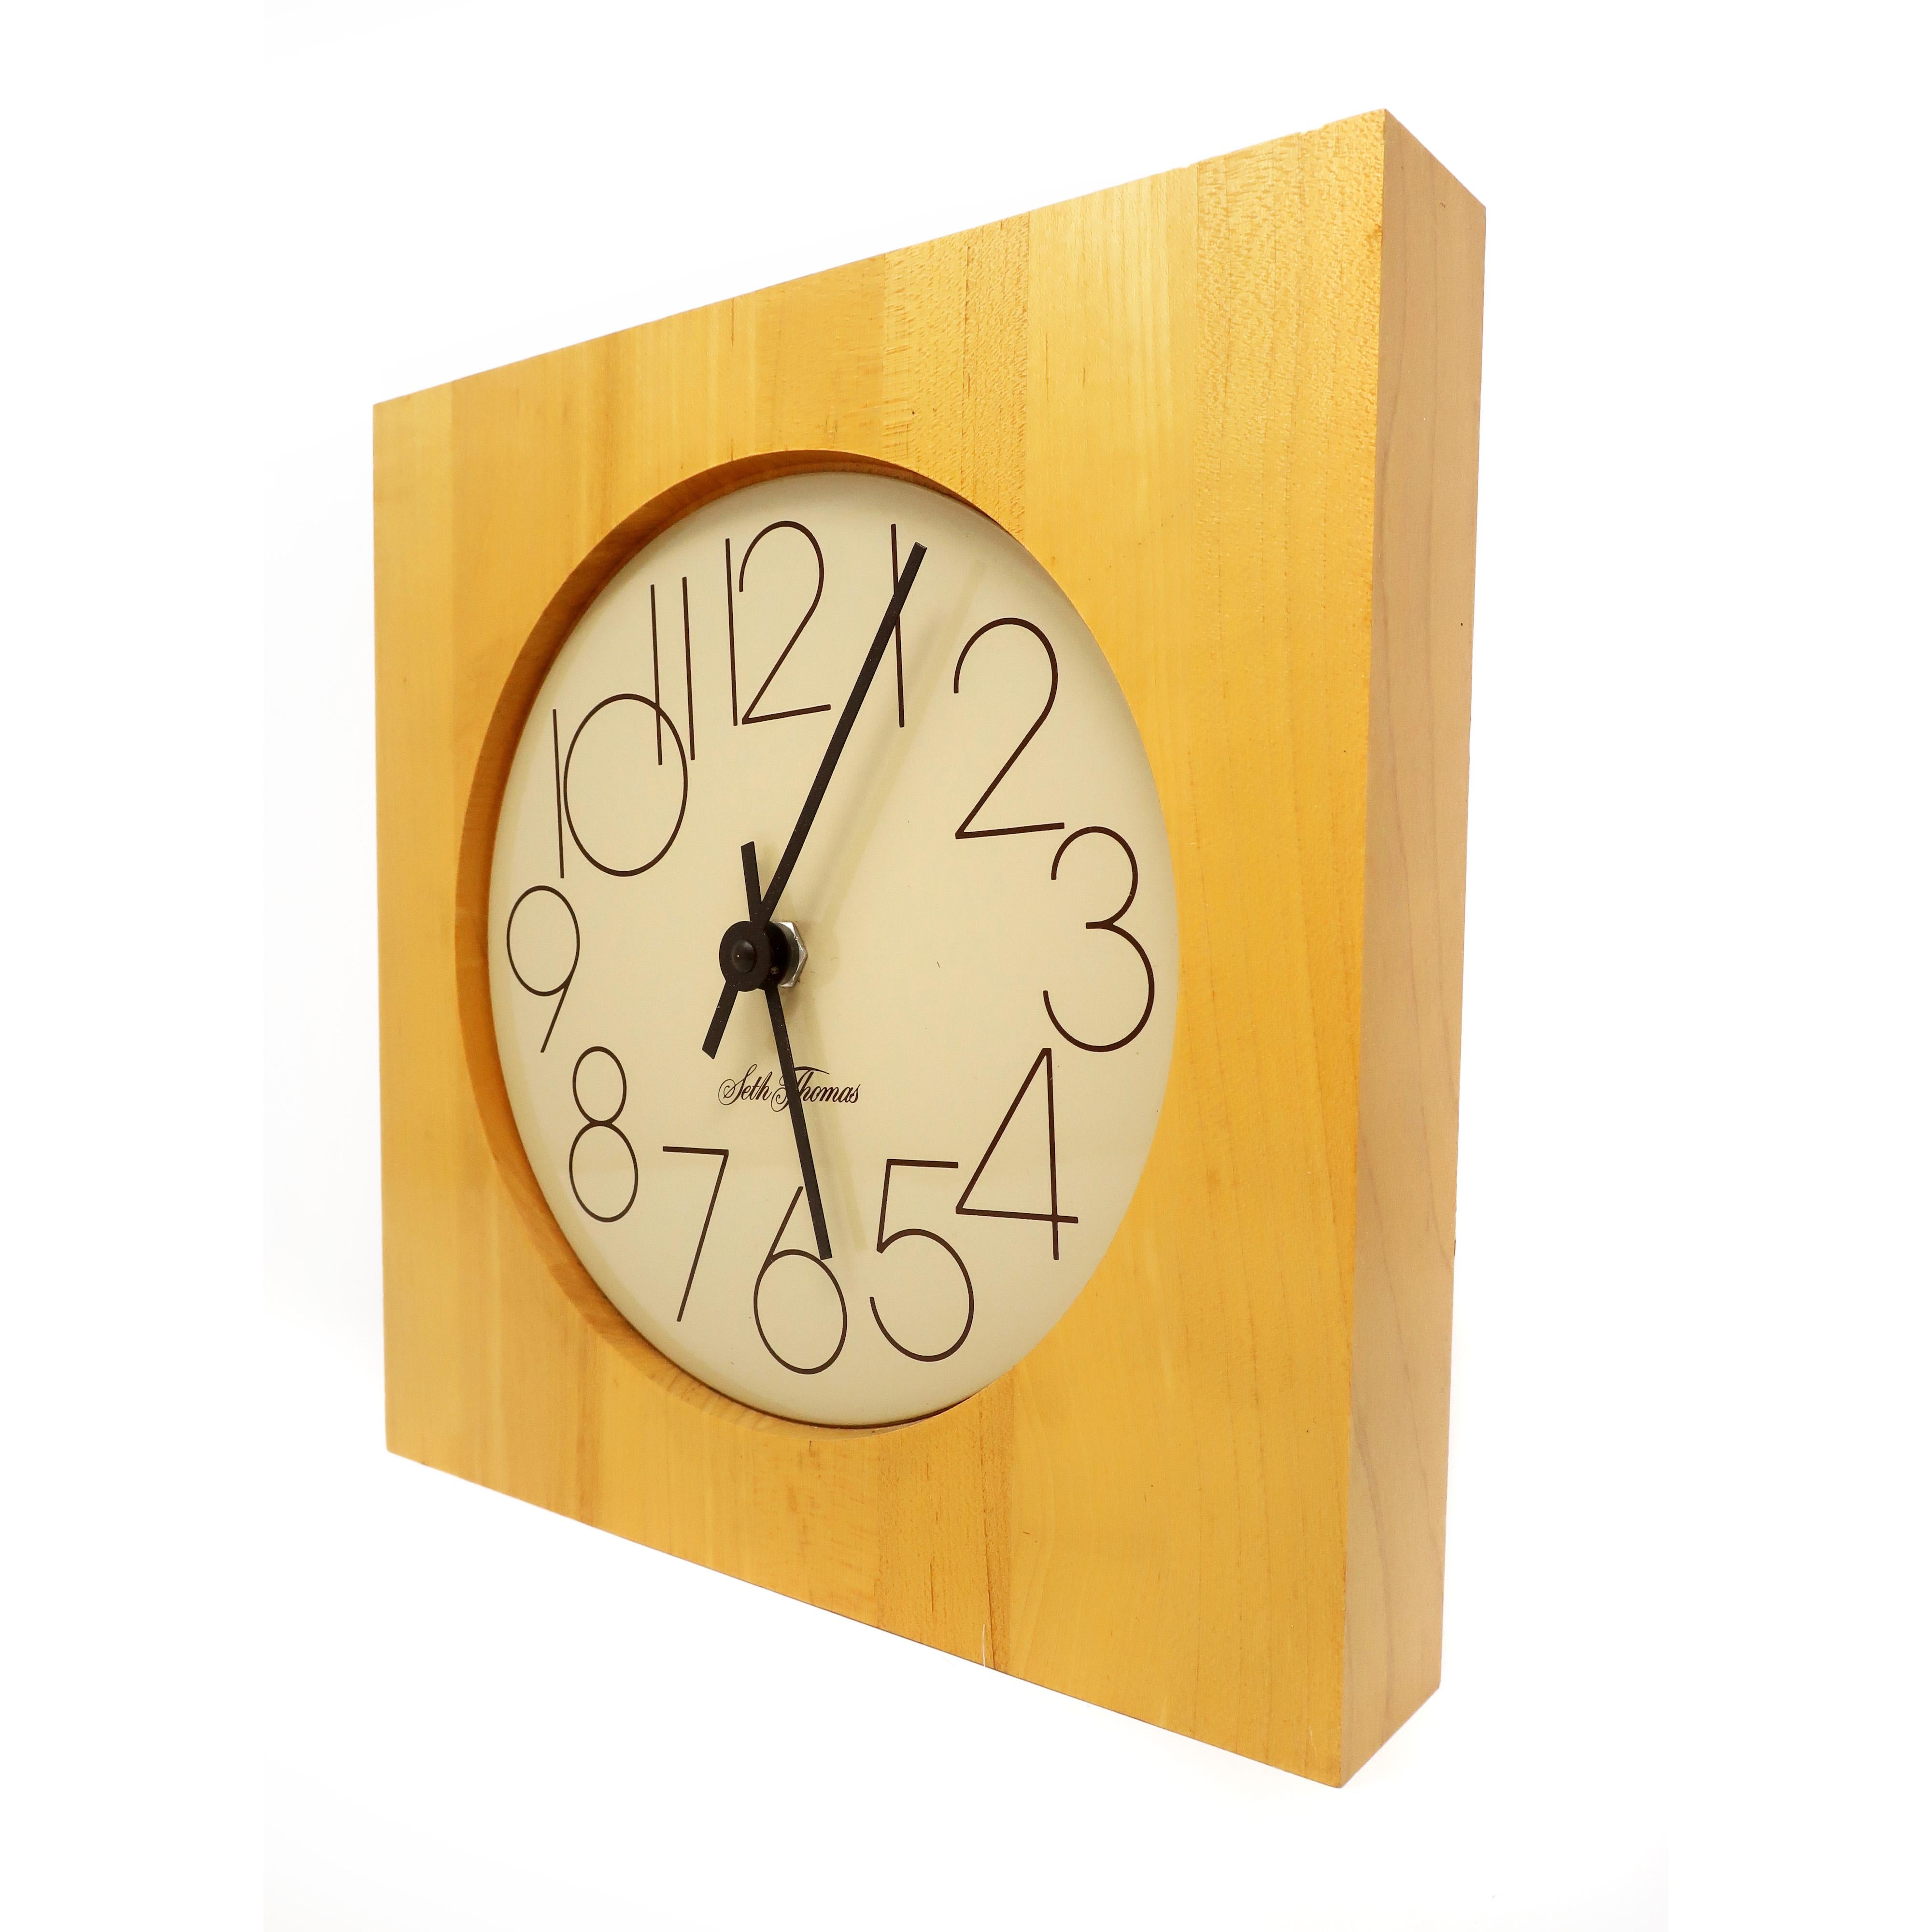 A vintage 1970s Seth Thomas wall clock with round off-white enameled metal face, black hands, and light colored butcher block-style square wood case. In excellent condition with no signs of wear or use and original label on back. Keeps time